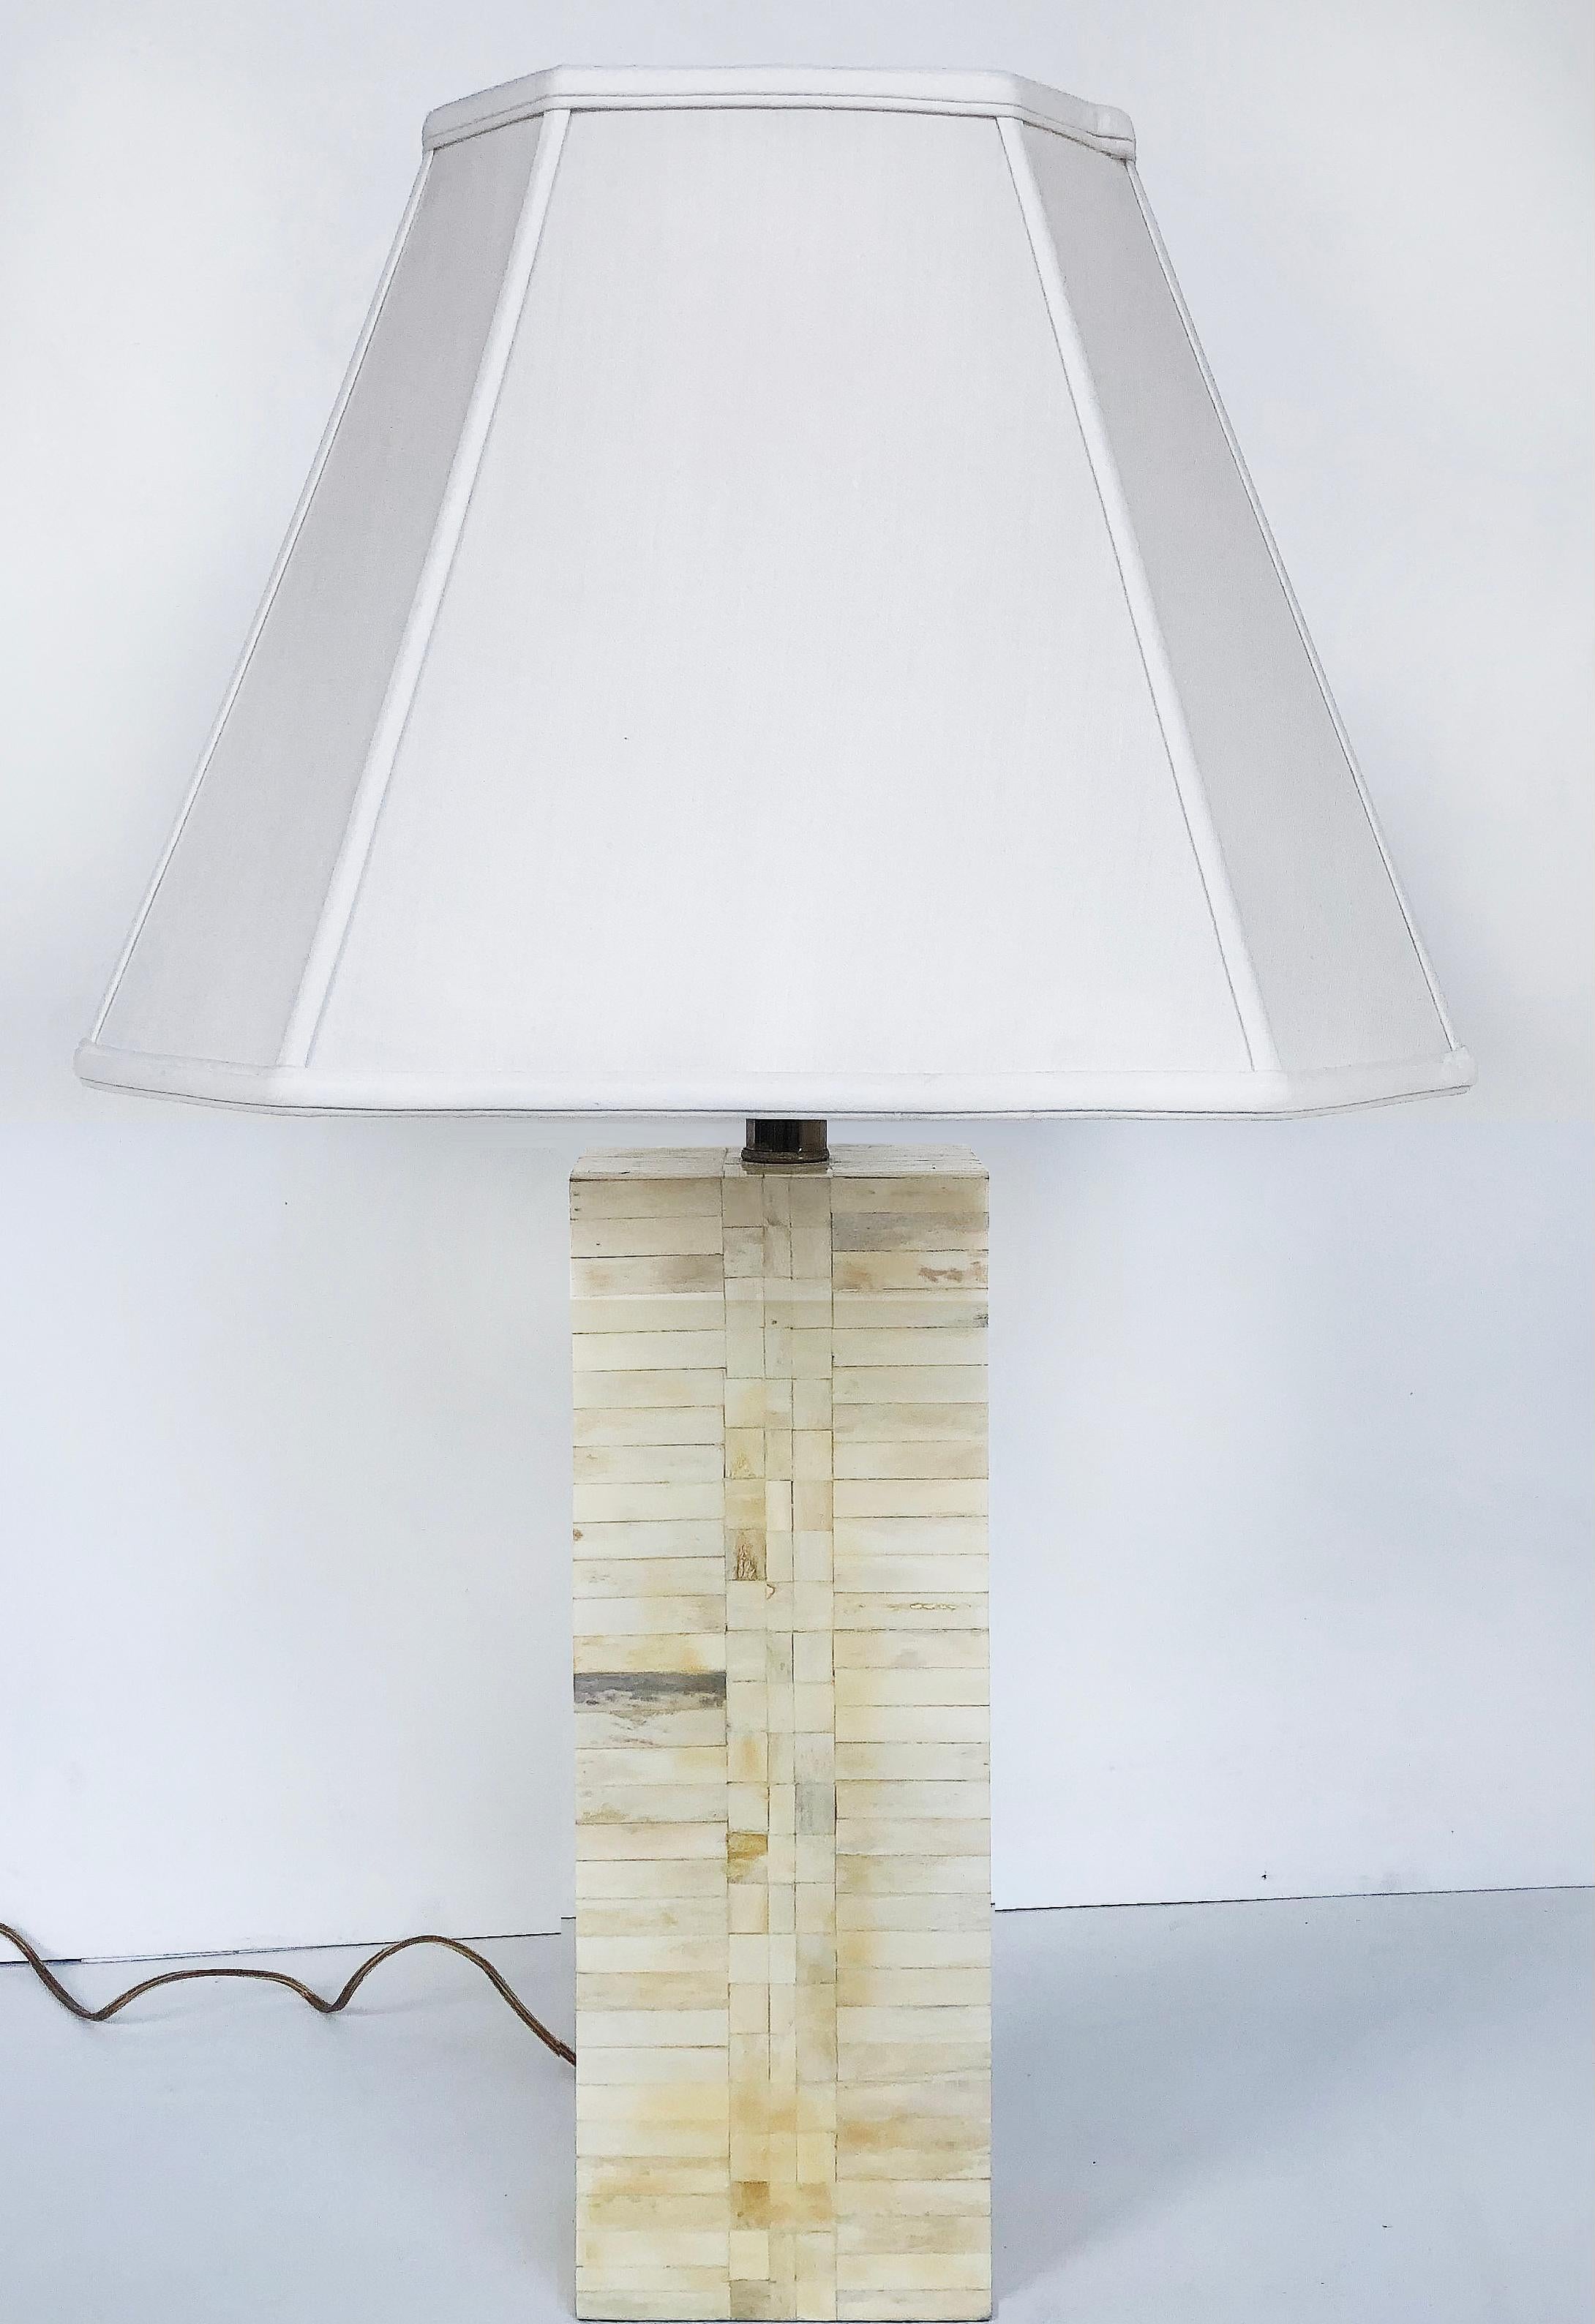 Offered for sale is a pair of Tessellated bone table lamps attributed to Maitland-Smith. The pair of lamps are completed with a pair of square fabric shades. The lamps each accommodate a single standard bulb. They are wired and working.